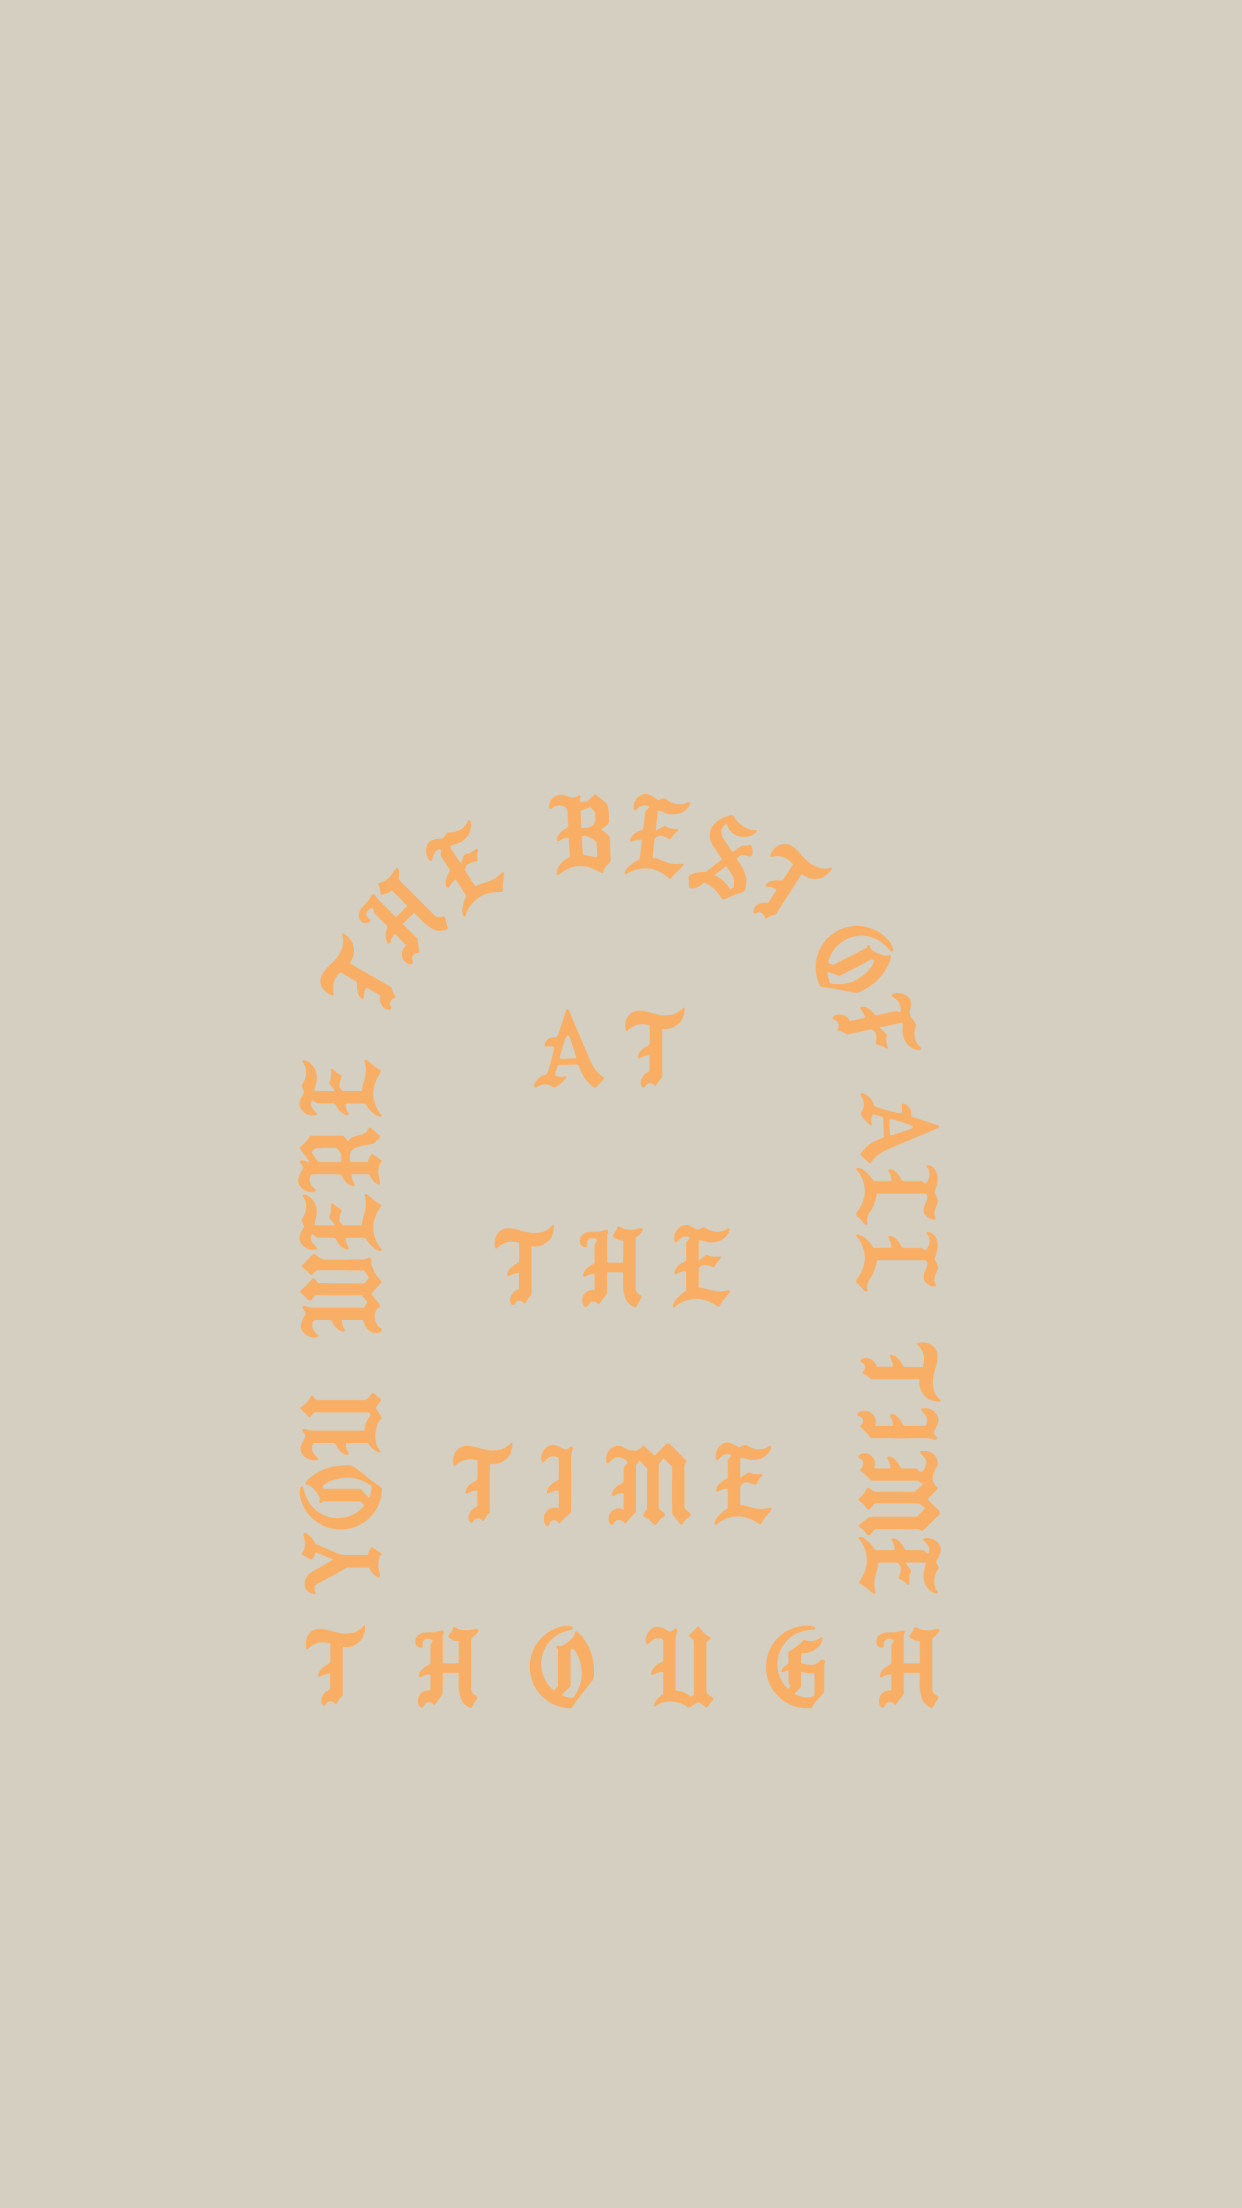 Kanye West, Phone Wallpapers